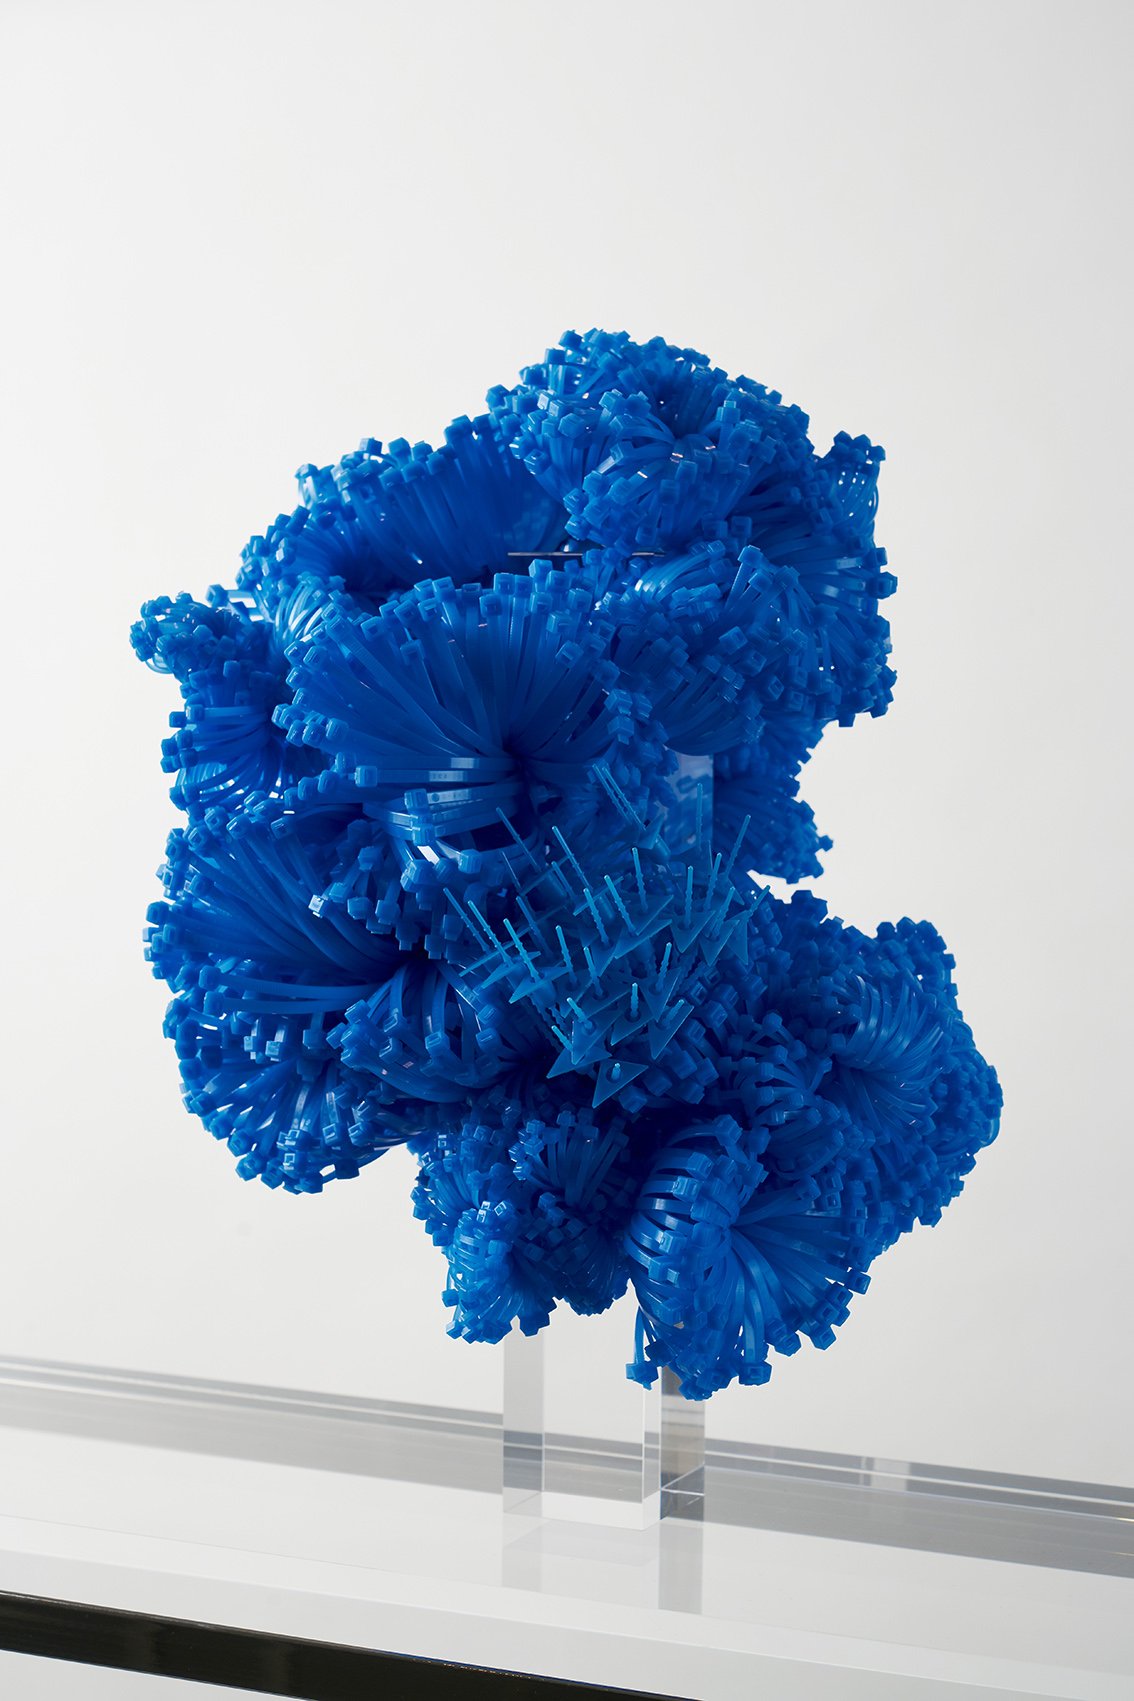  Grace Tan   Dreaming of the Azurite Grove   2021  Assorted blue polyamide cable fasteners and tags, clear acrylic rod  H38 x W26 x D26 cm 